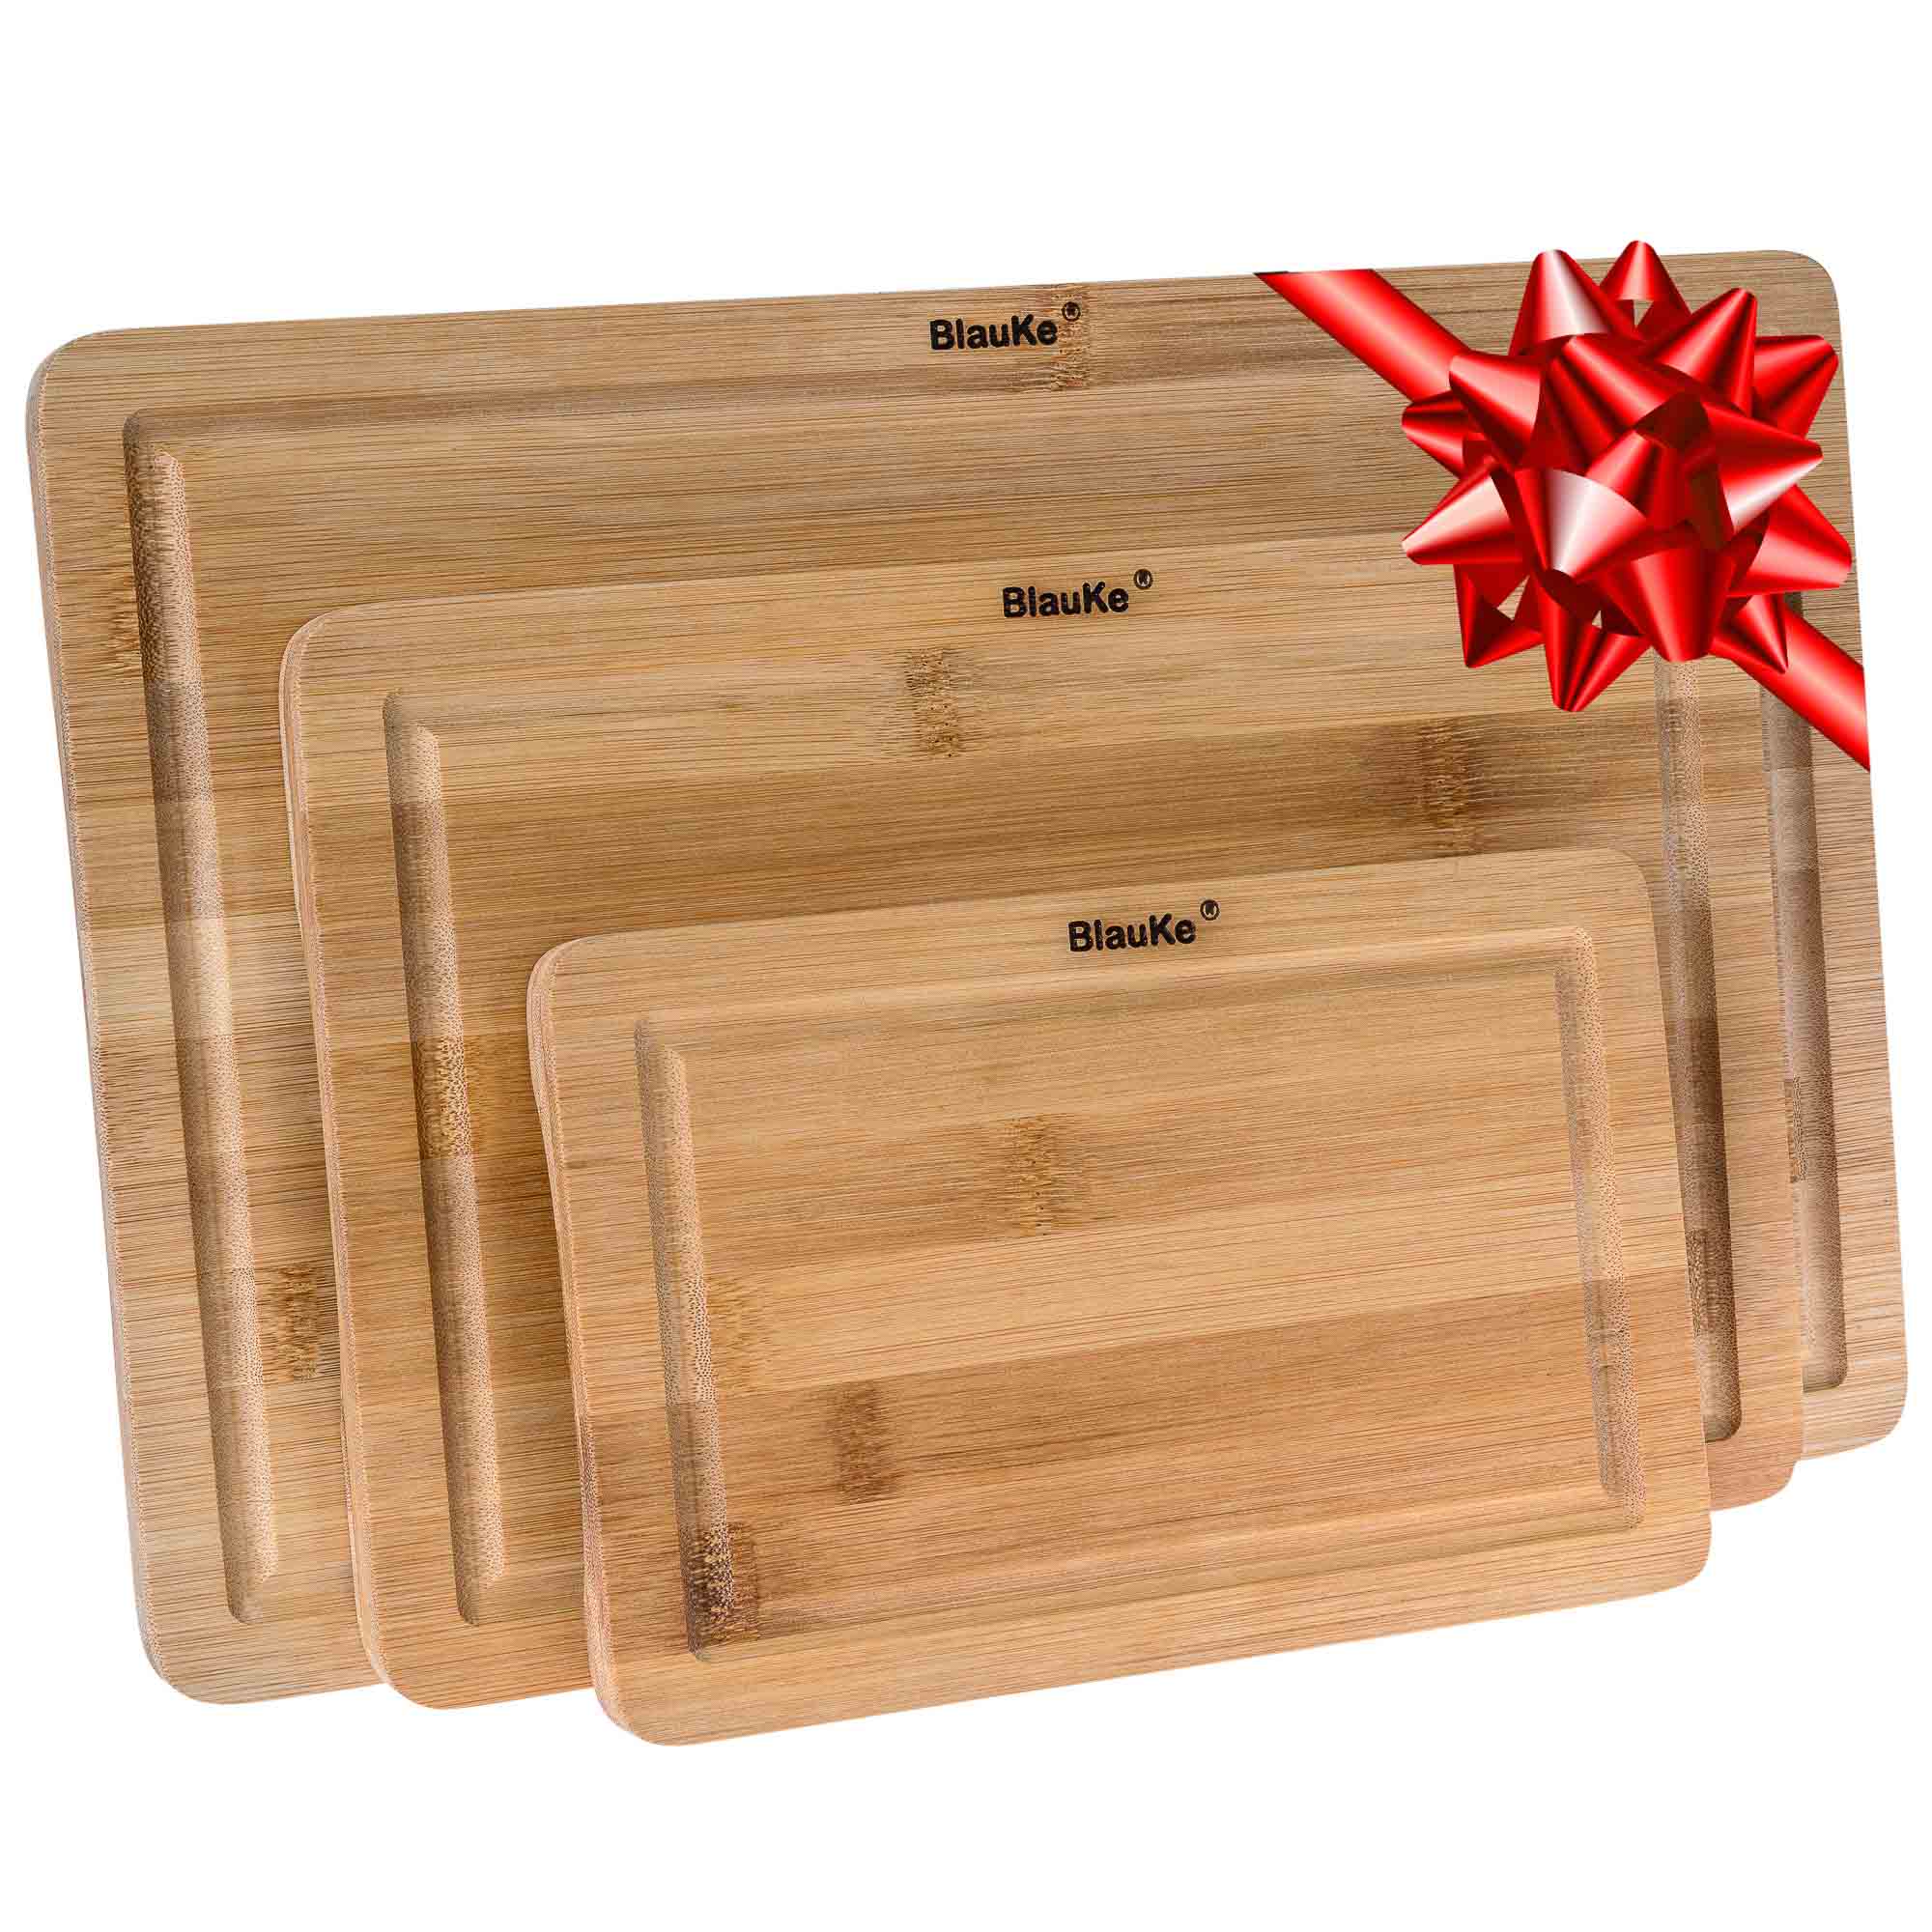 http://blauke.com/cdn/shop/products/BambooCuttingBoardSetof3_OrganicKitchenChoppingBoardsforMeatCheese_Vegetables_HeavyDutyBambooCuttingBoardswithJuiceGrooves_Handles_WoodenServingTray_CarvingBoard-8.jpg?v=1615828715